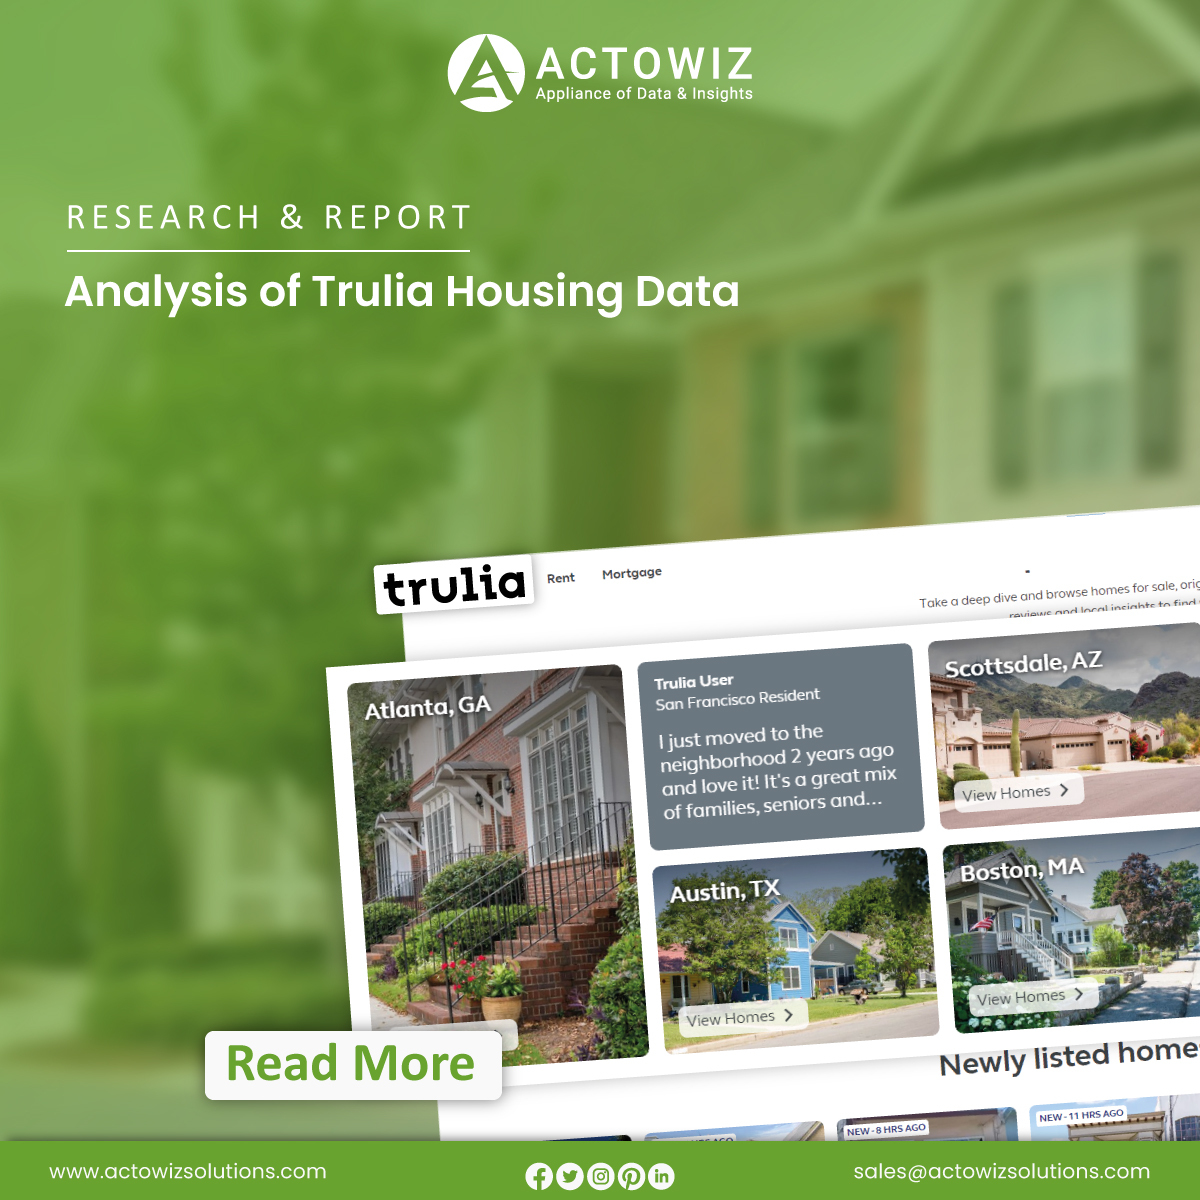 Discover valuable insights derived from analyzing 16,900 properties listed on Trulia in North Carolina, enhancing analysis of Trulia housing data.

actowizsolutions.com/analysis-of-tr…

#AnalysisofTruliaHousingData #ScrapeTruliaHousingData #DataCollections #actowizsolutions #usa #uk #uae